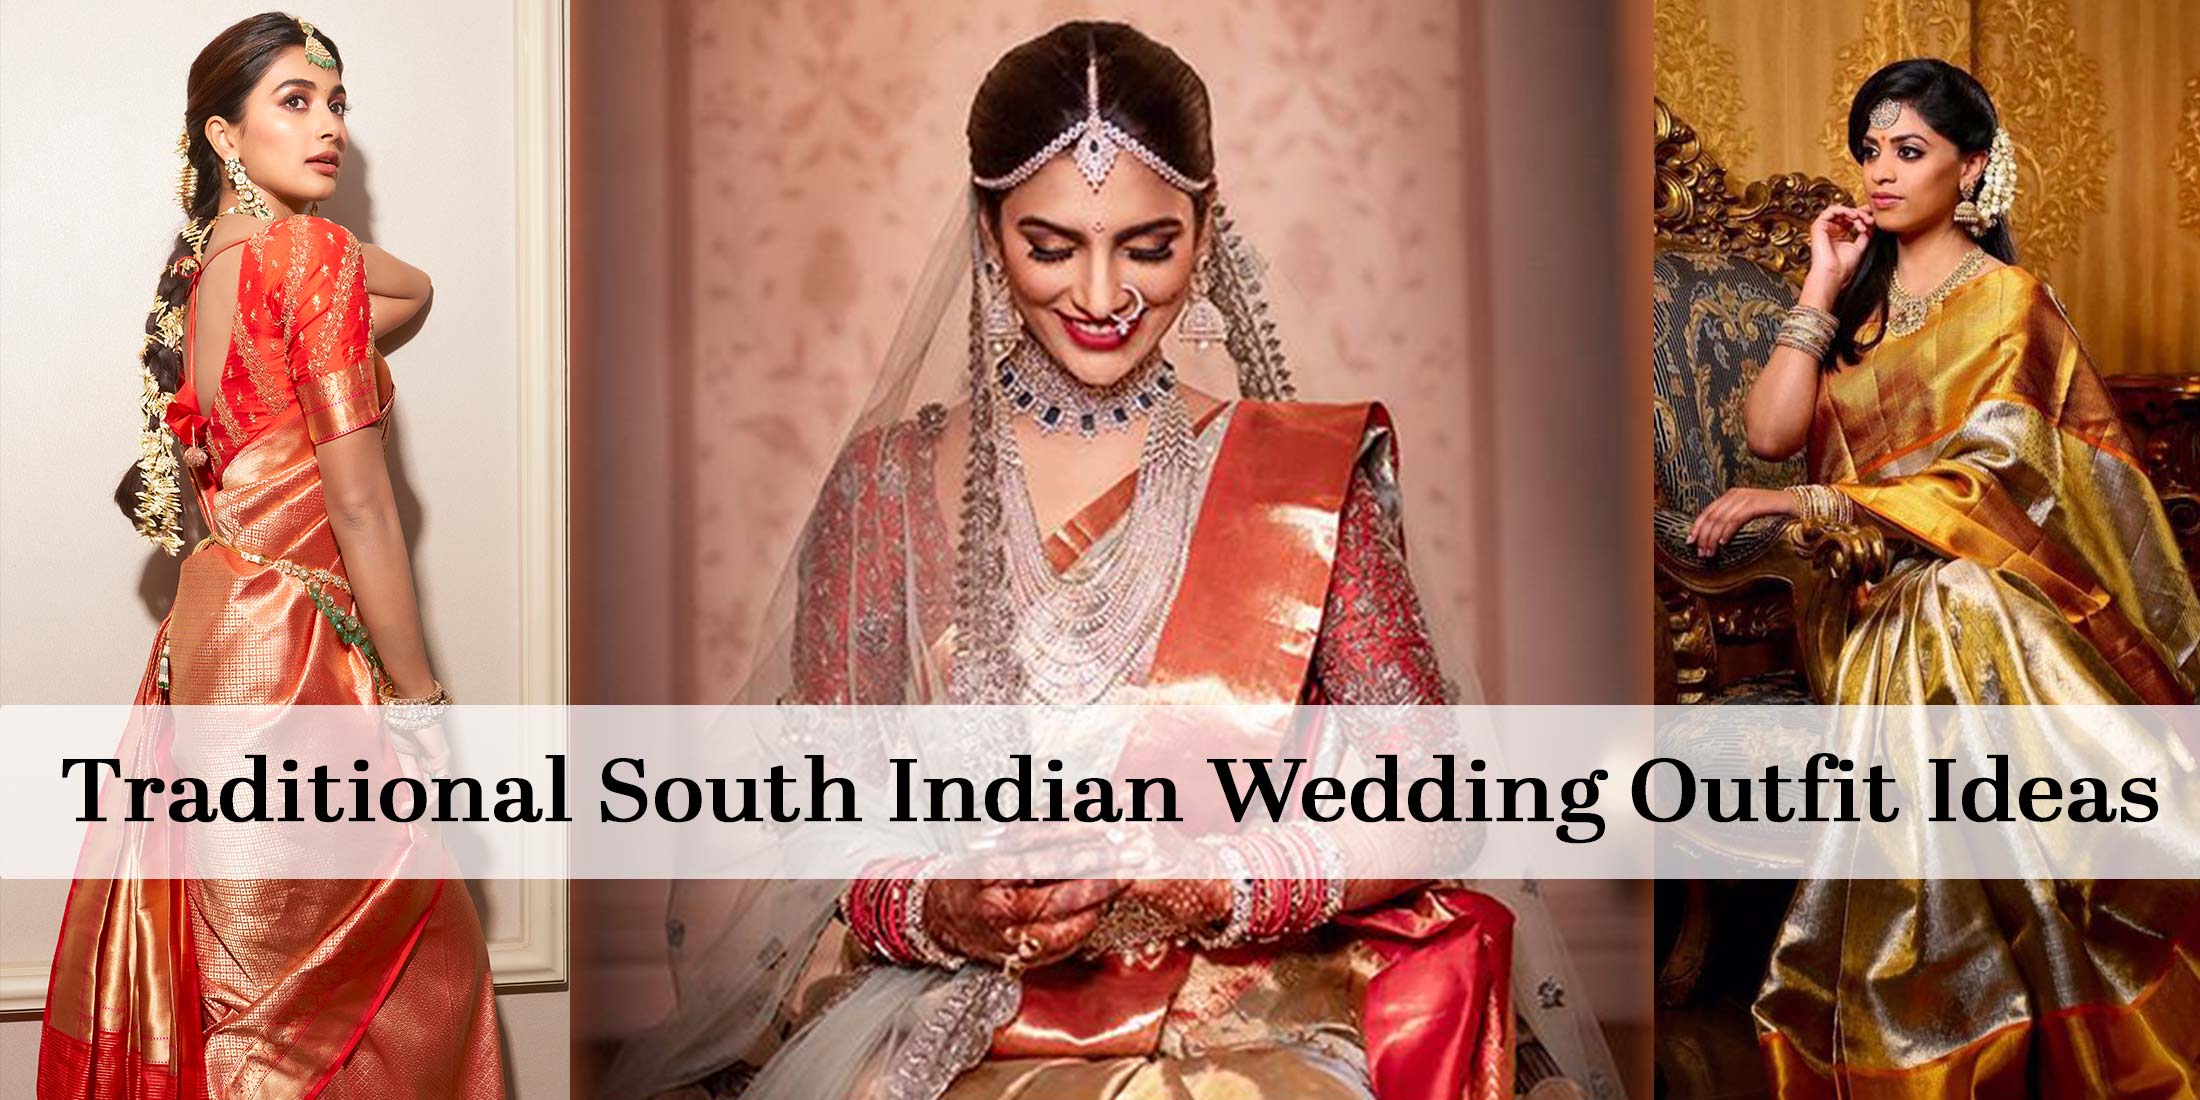 25 Unique Designs of South Indian Sarees To Know Your Tradition